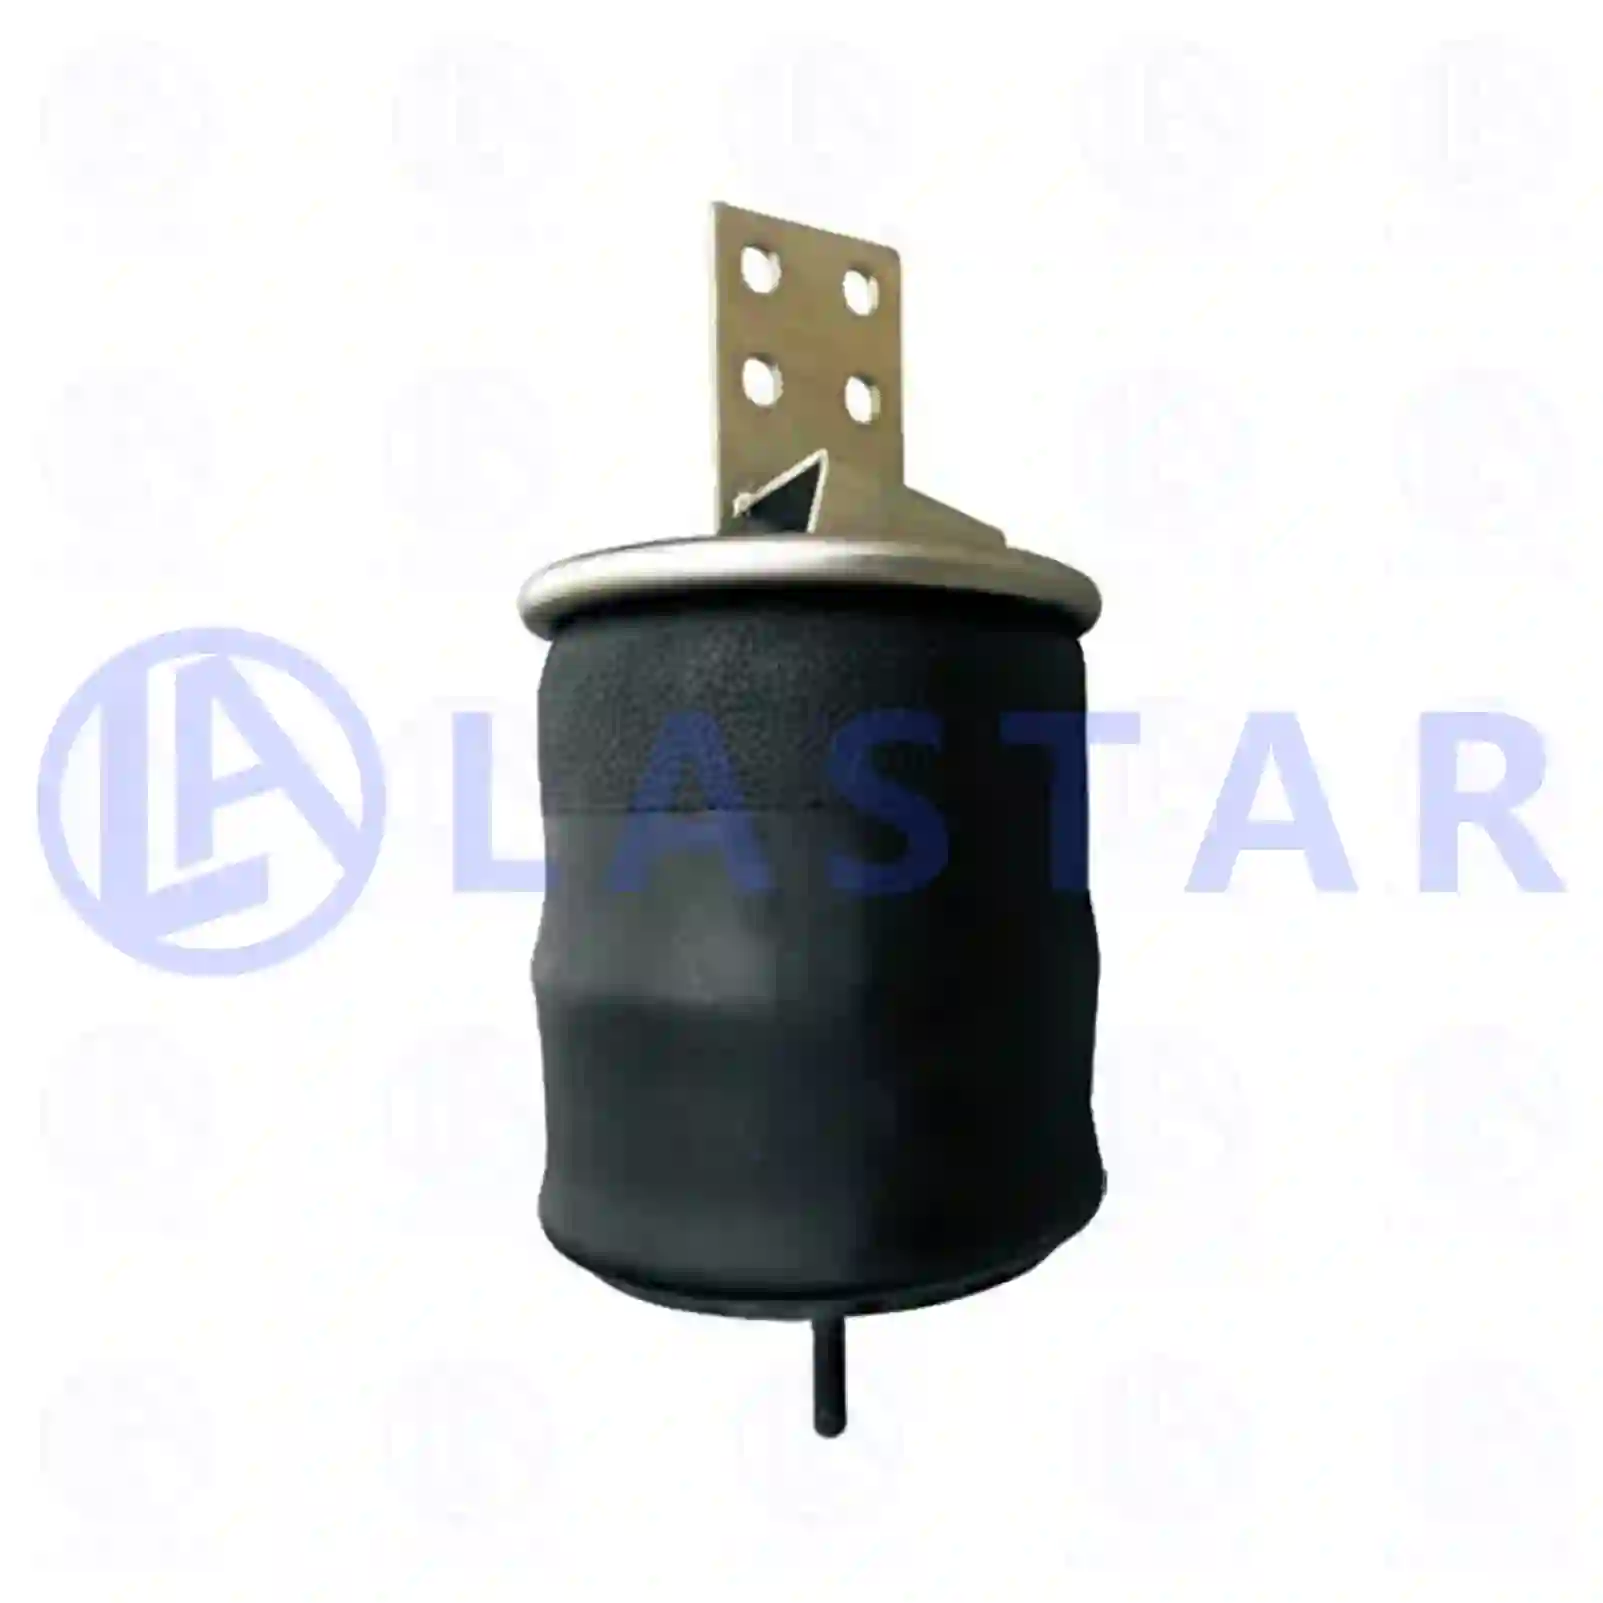 Air spring, with plastic piston, 77727634, 41225901, 41270466, ||  77727634 Lastar Spare Part | Truck Spare Parts, Auotomotive Spare Parts Air spring, with plastic piston, 77727634, 41225901, 41270466, ||  77727634 Lastar Spare Part | Truck Spare Parts, Auotomotive Spare Parts